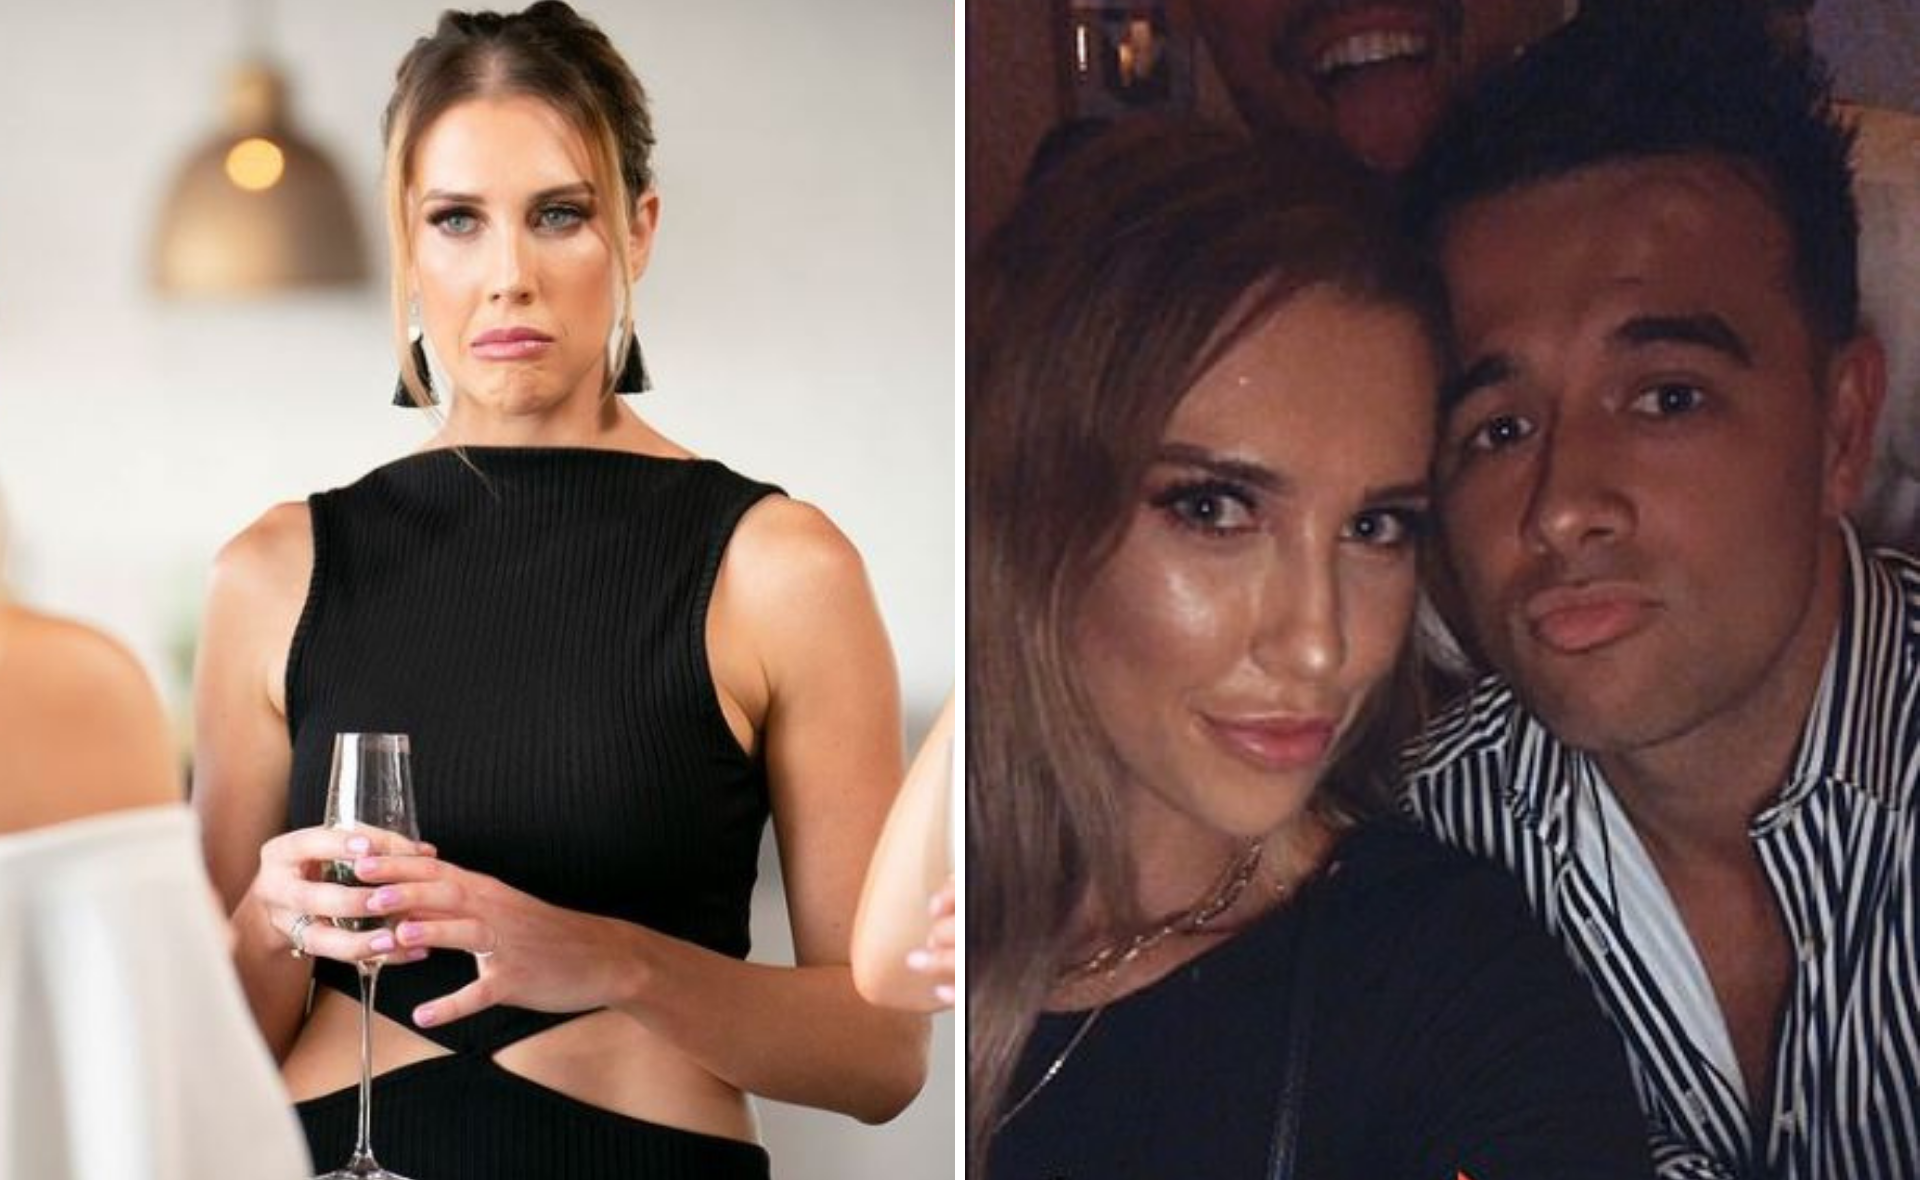 MAFS’ Bec’s surprise hookup with a Bachelor star revealed